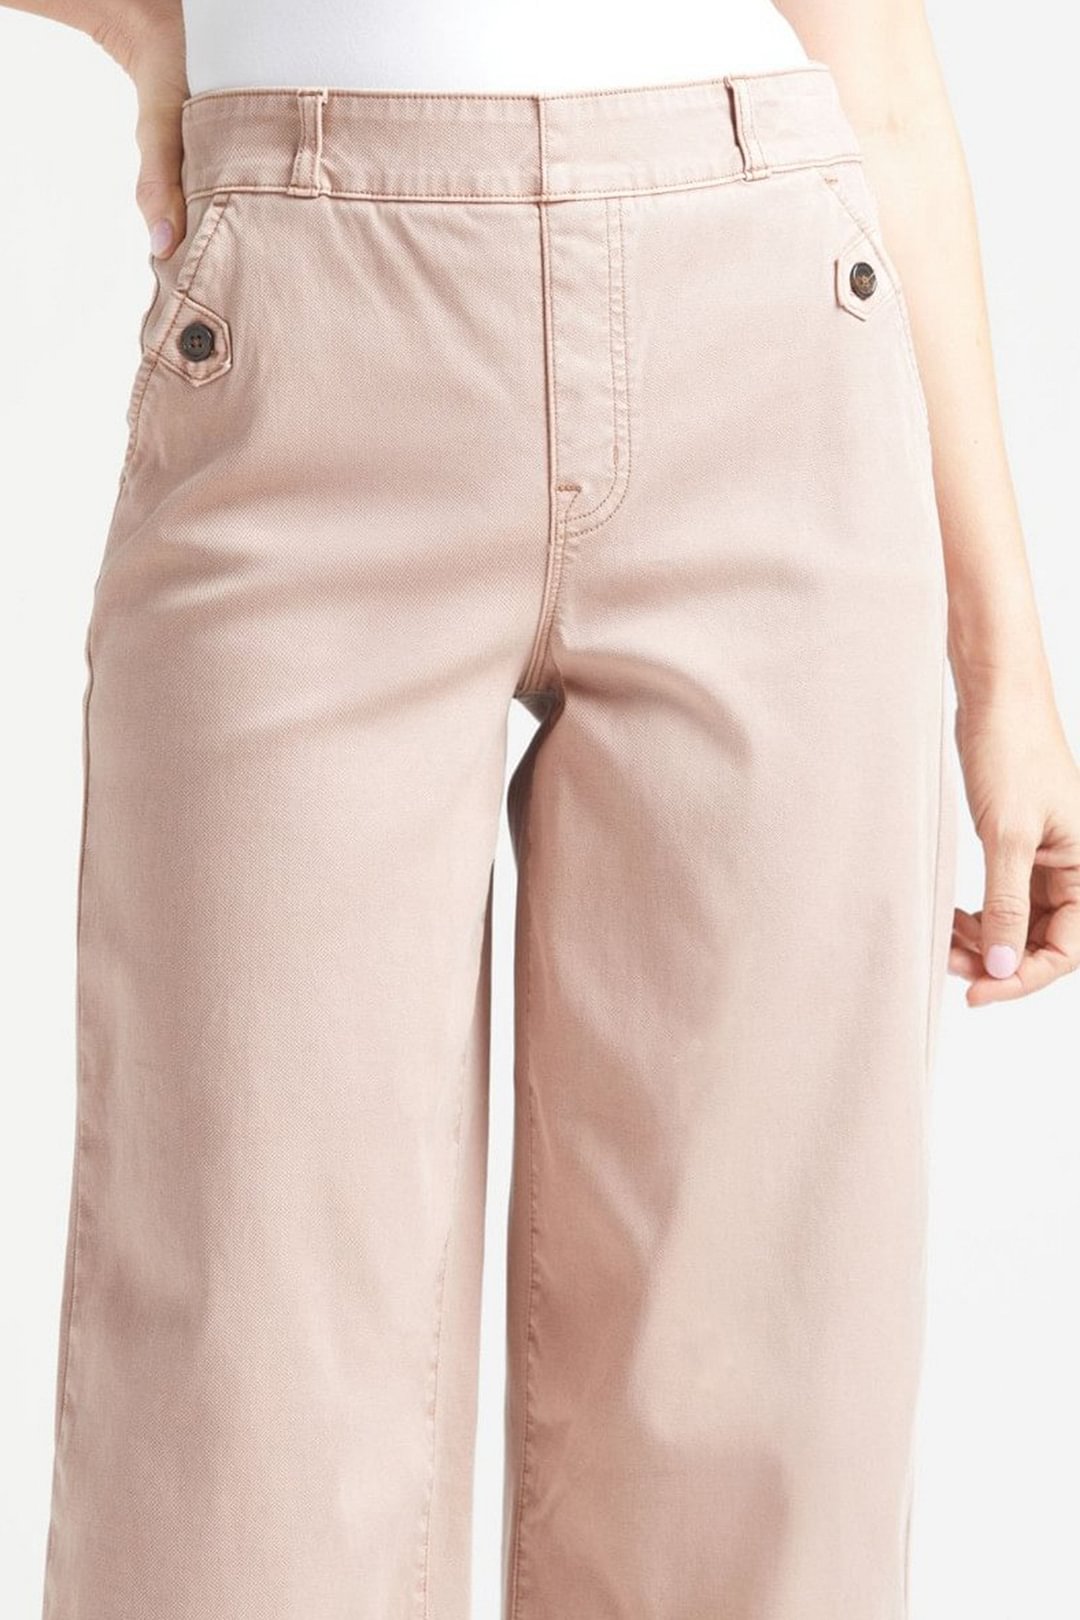 Casual Everyday Cropped Wide-Leg Pants (Buy 2 Free Shipping)